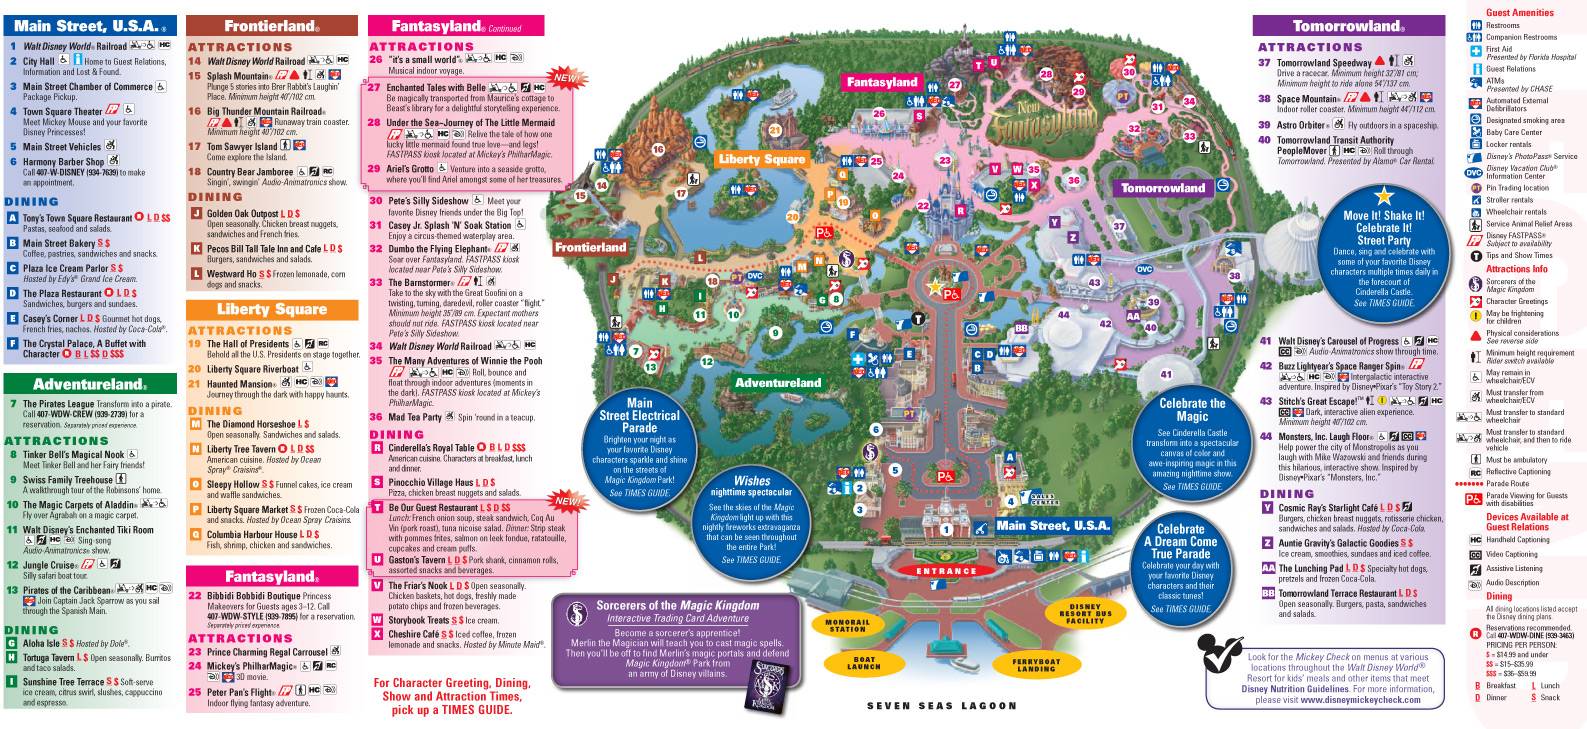 New park maps released today include 'My Disney Experience' details and no more Kodak